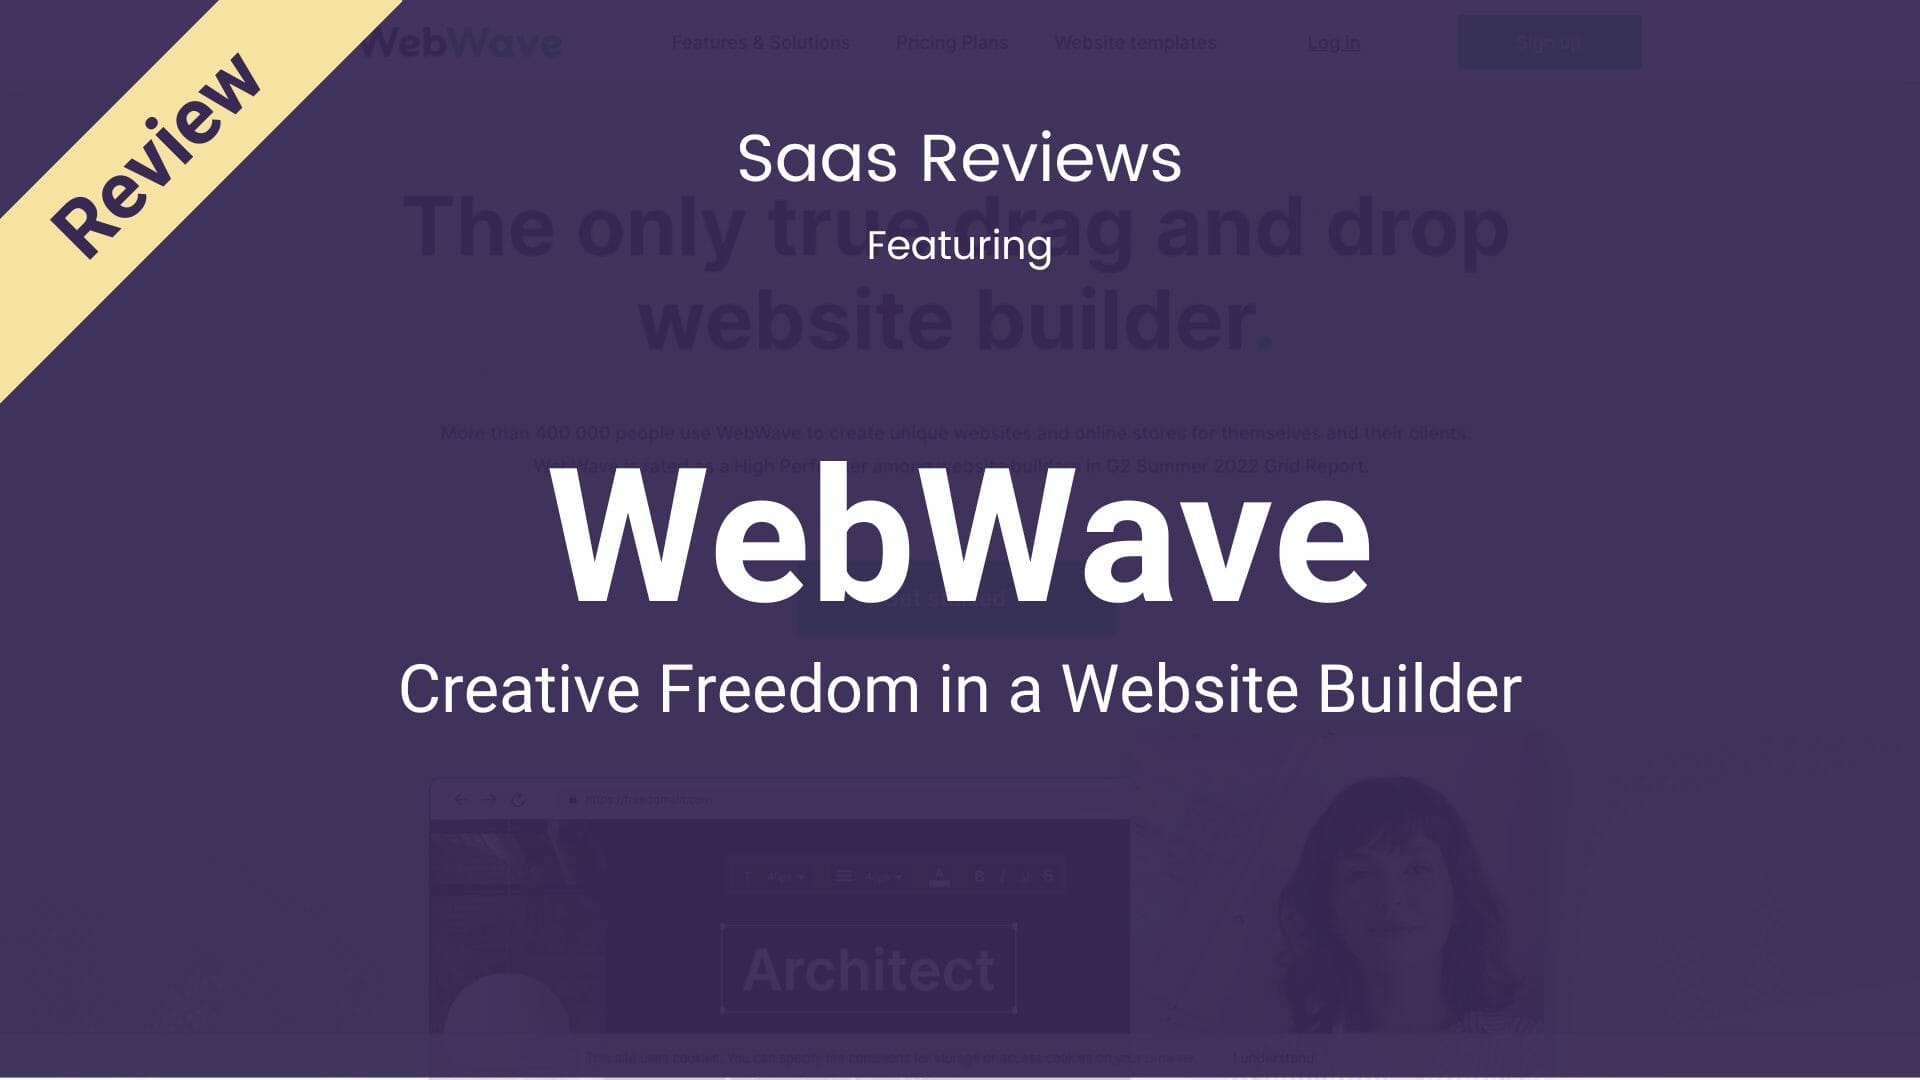 WebWave Review: Creative Freedom in a Website Builder